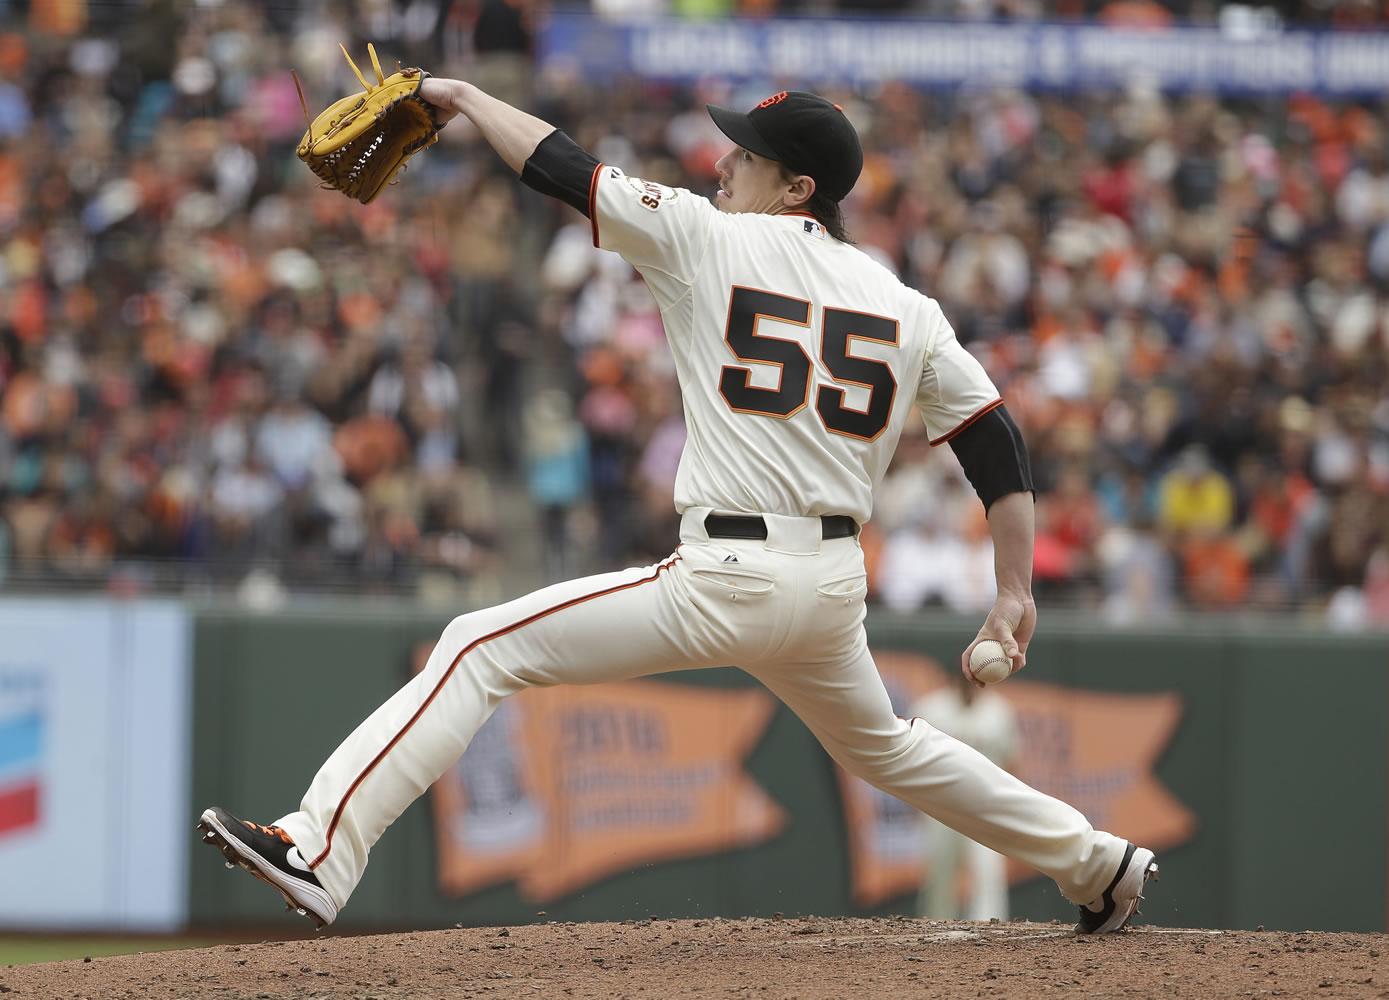 San Francisco Giants starting pitcher Tim Lincecum throws in the fifth inning of their baseball game against the San Diego Padres, Wednesday, June 25, 2014, in San Francisco.